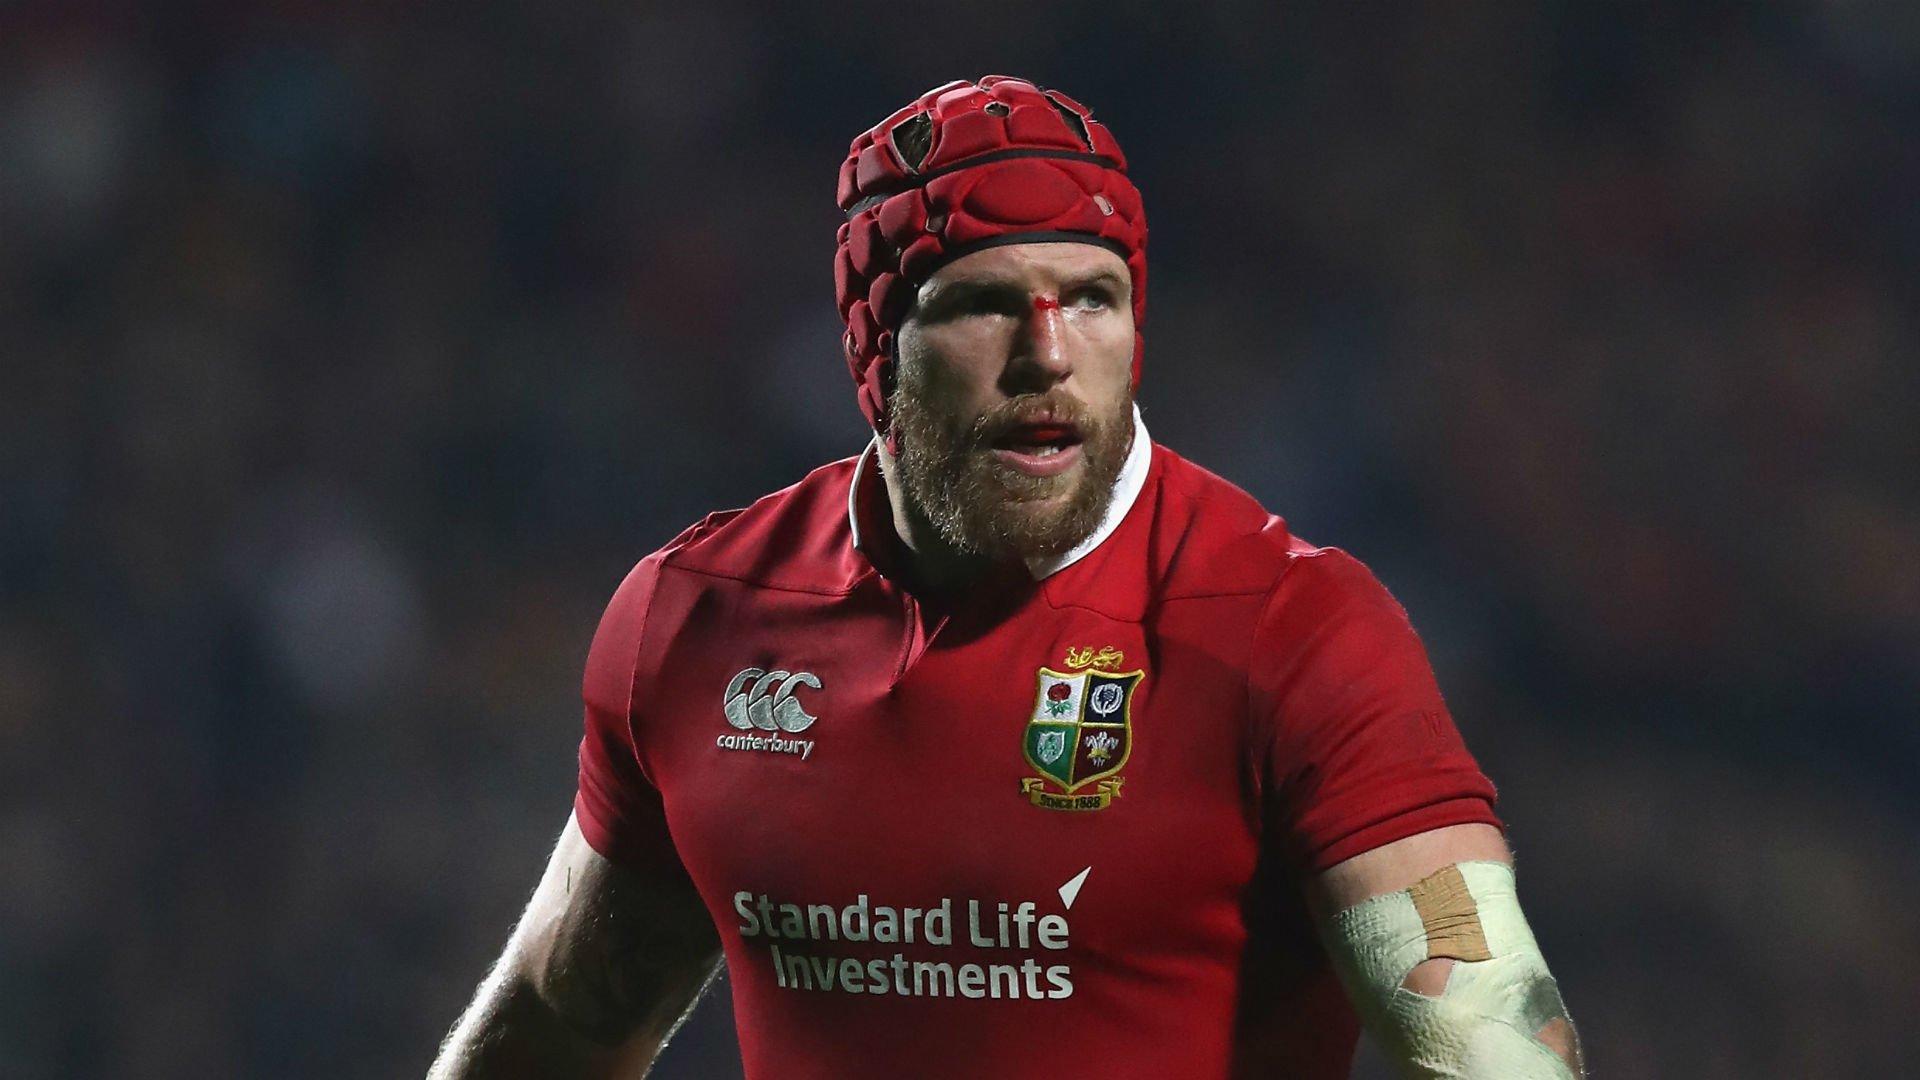 The other two countries James Haskell could have played for